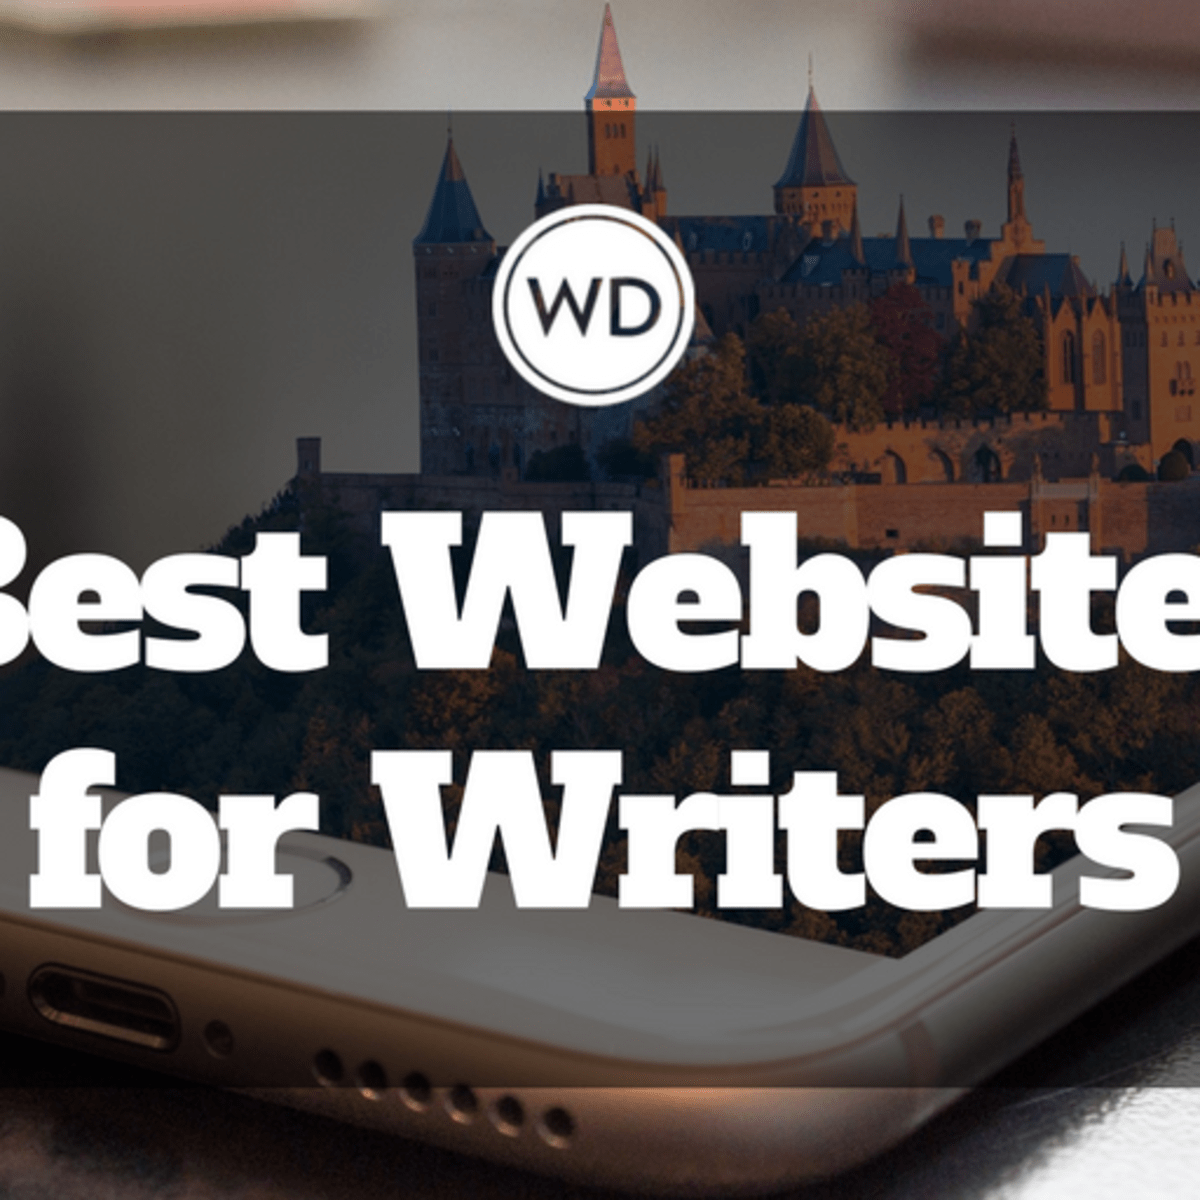 Websites for Writers: 30 Sites with Great Writing Advice